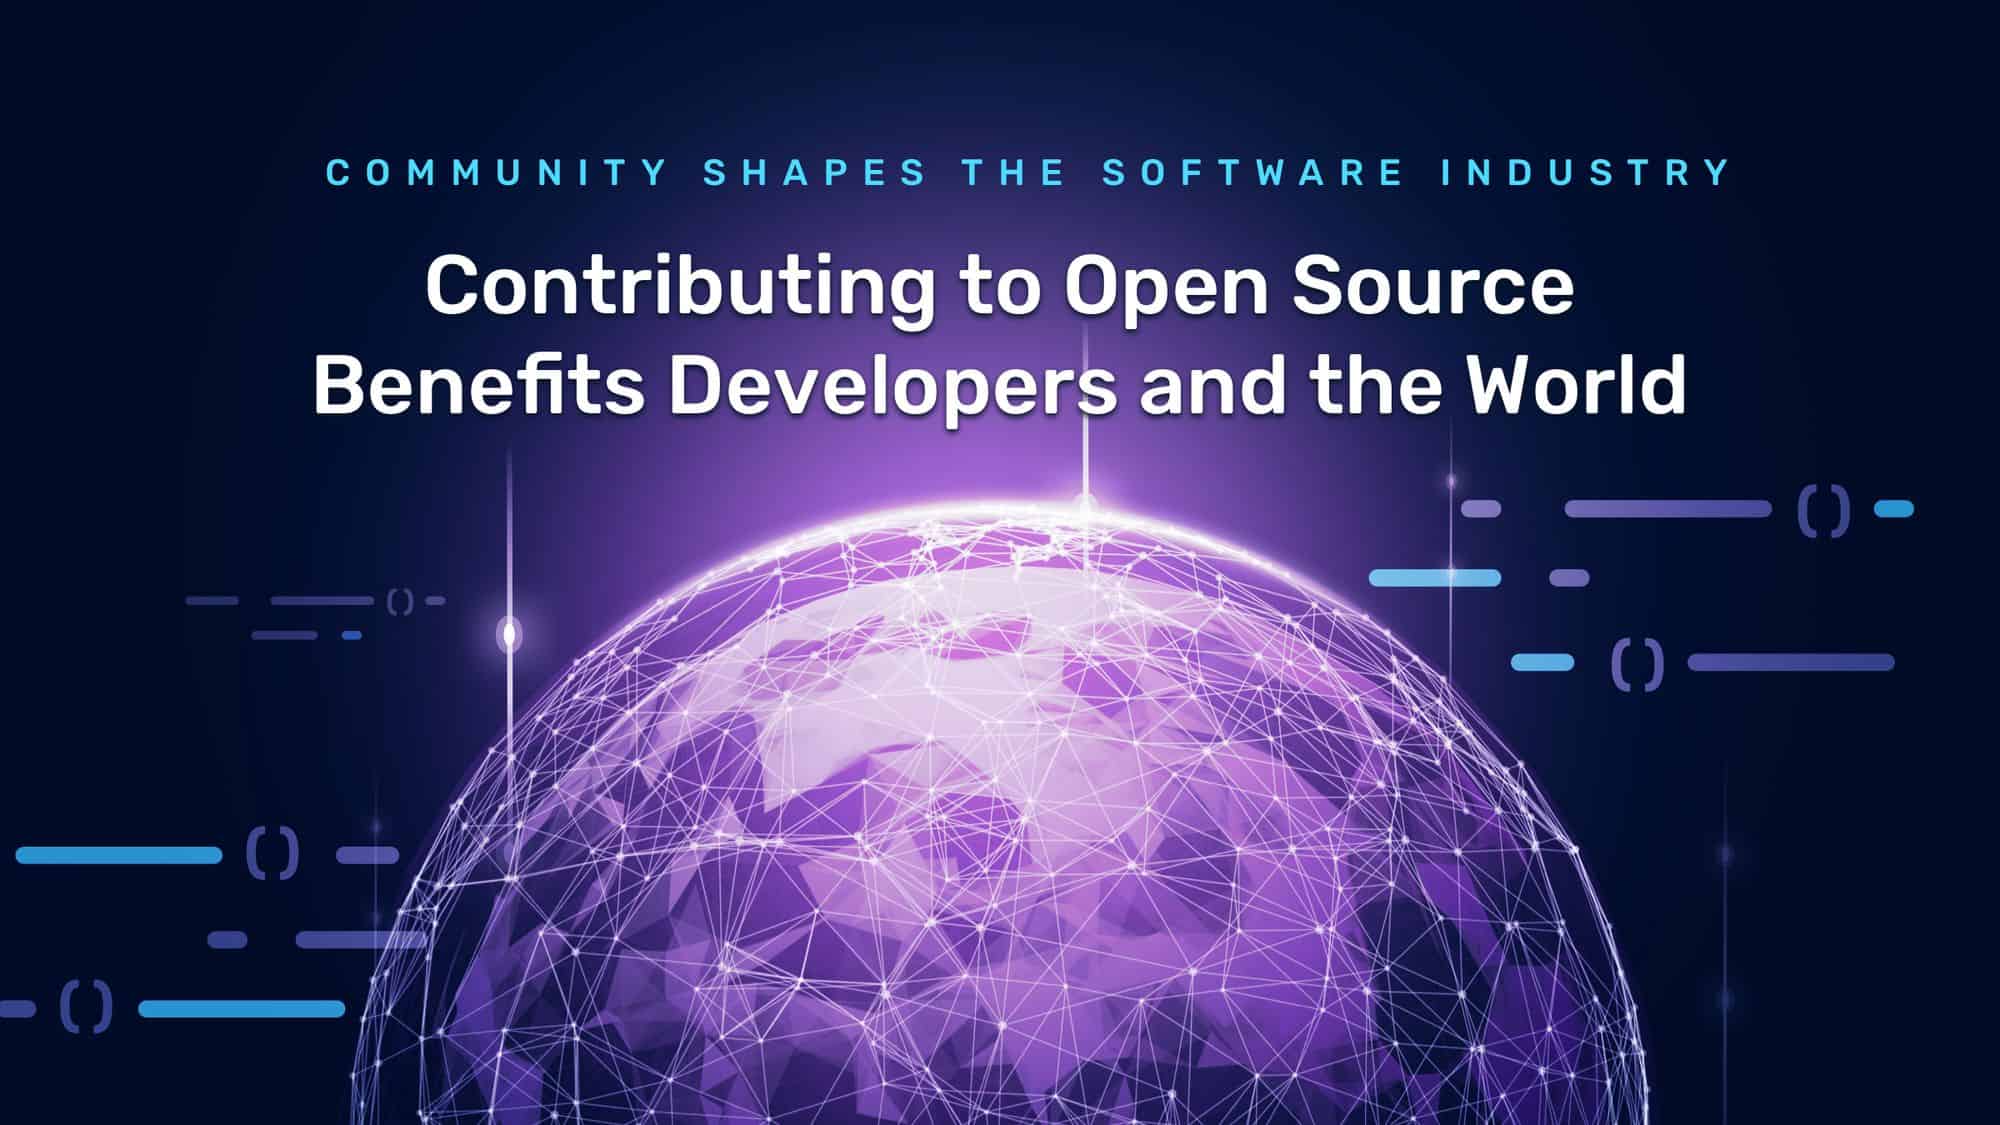 Community Shapes The Software Industry, Contributing to Open Source Benefits Developers and the World